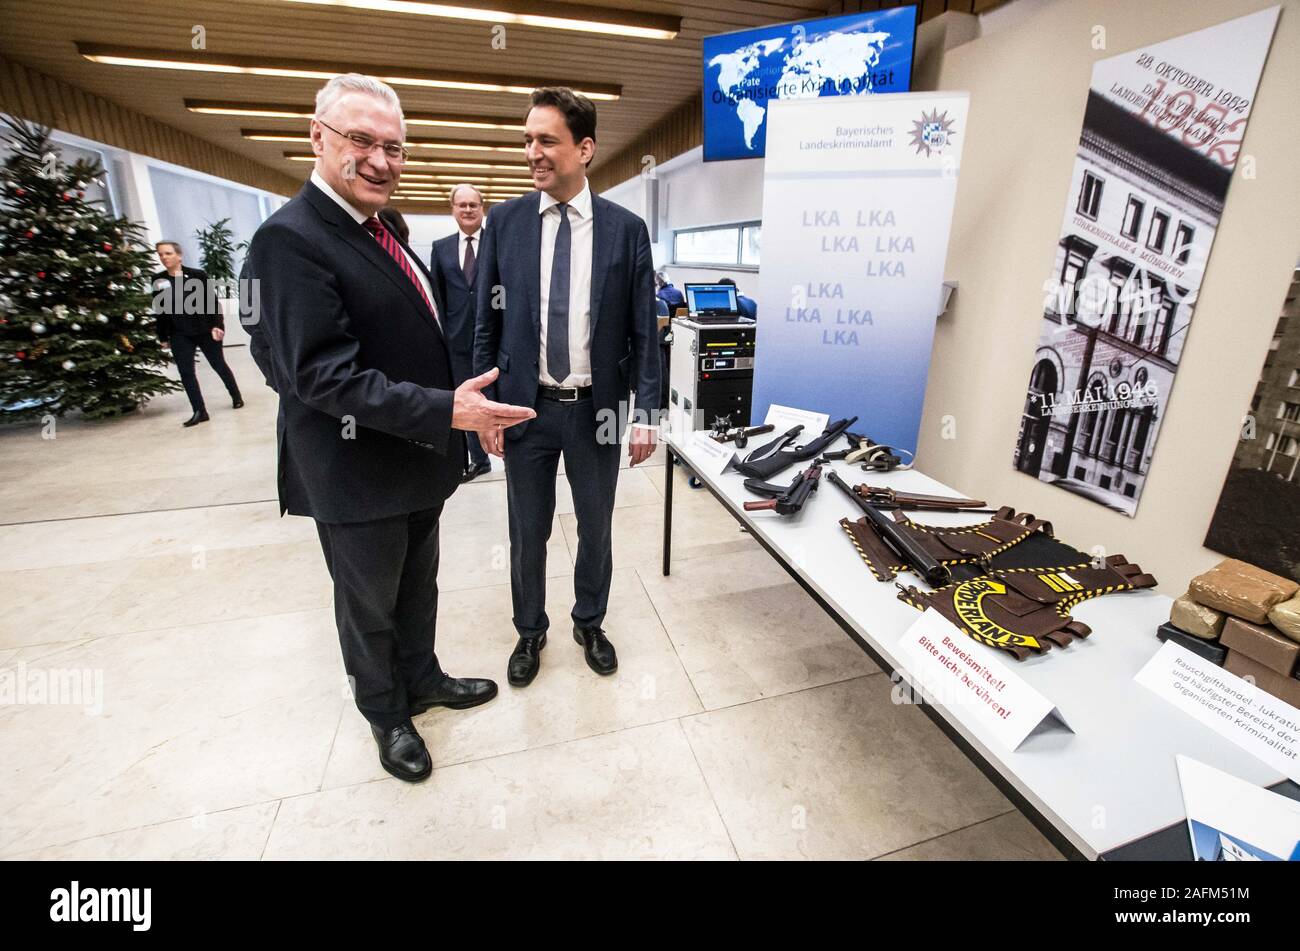 Munich, Bavaria, Germany. 16th Dec, 2019. JOACHIM HERRMAN, Bavarian Interior Minister with GEORG EISEINREICH, Justice Minister of Bavaria. Bavarian Interior Minister Joachim Herrmann, Justice Minister George Eisenreich, Bavarian Landeskriminalamt (Crime Office) preisdent Robert Heimberger, and Bavarian Attorney General Reinhard RÃ¶ttle (Reinhard Roettle) presented the results of the war on organized crime in Bavaria, In 2018 alone, the damages to the state totaled some 169 million Euros, a staggering increase from 2017's figure of 12 million. Processes against organized crime have cost Stock Photo